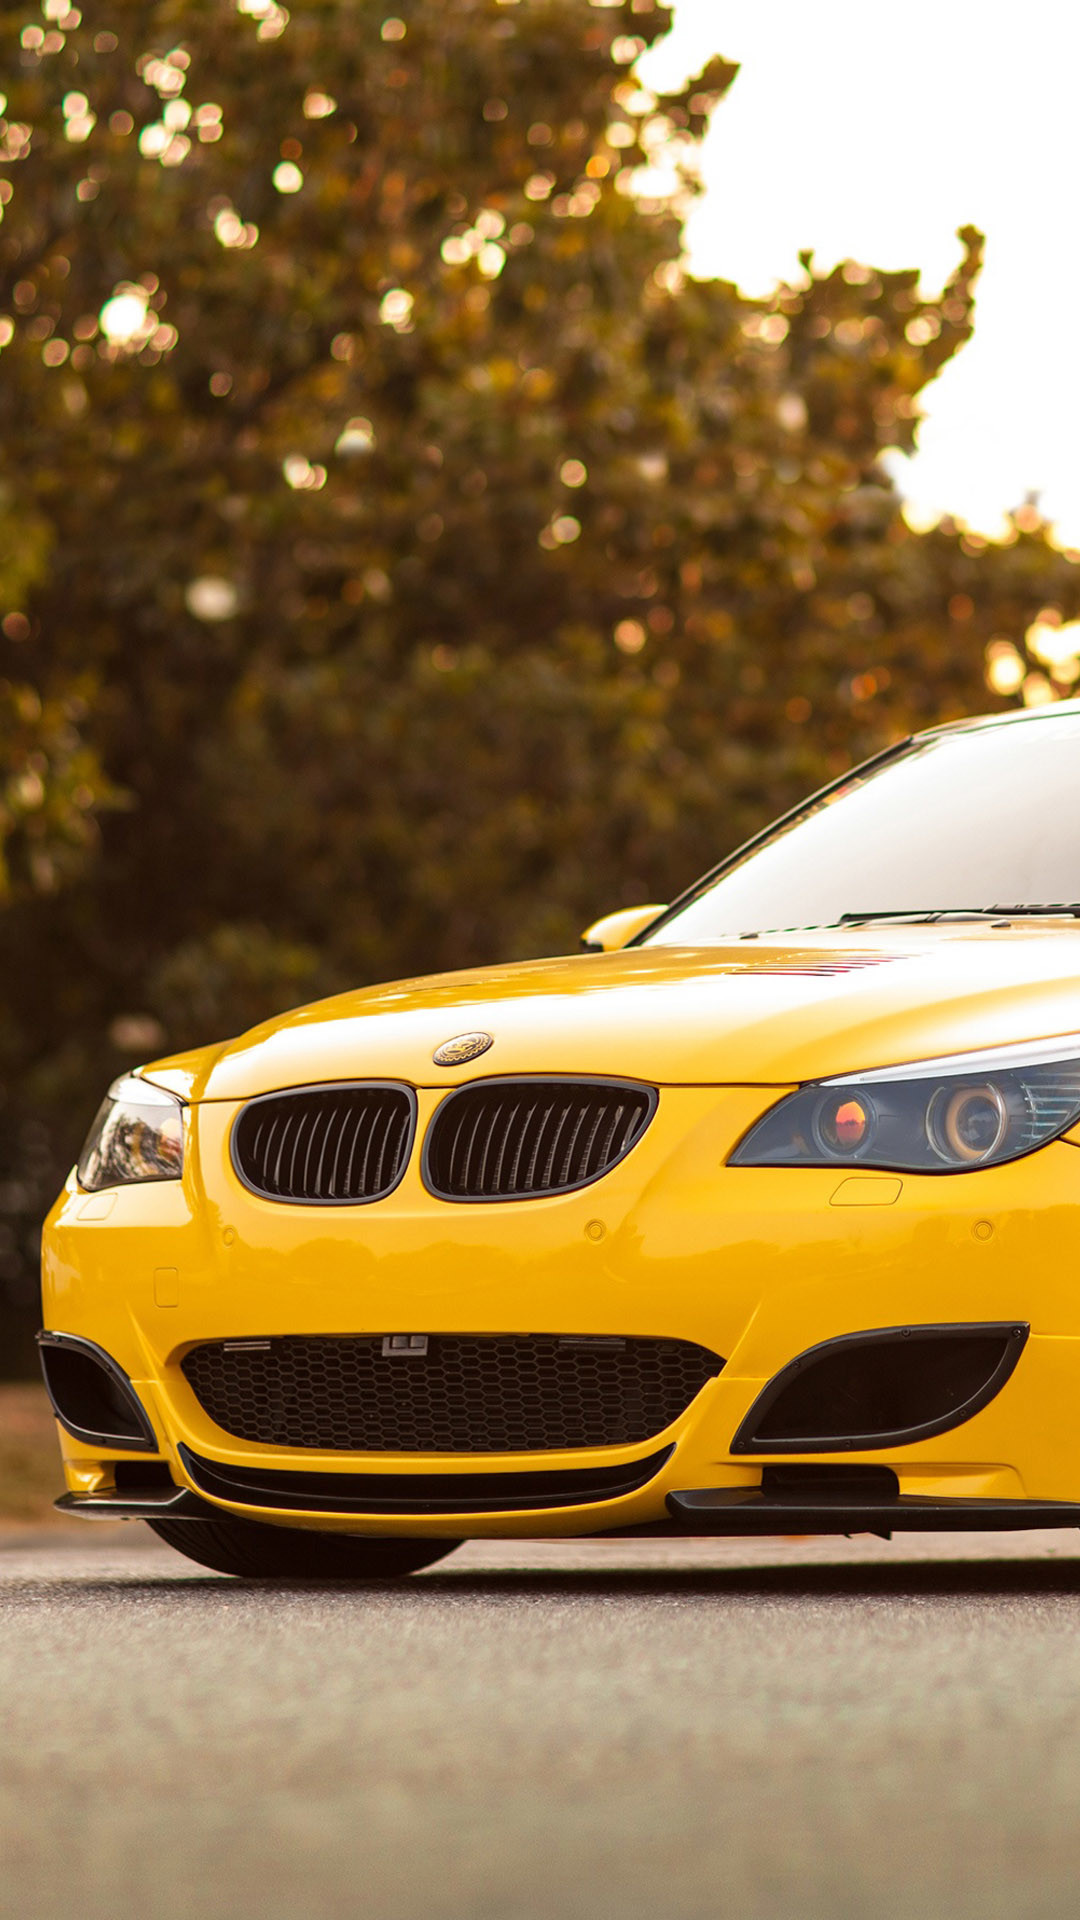 bmw wallpaper android, land vehicle, vehicle, car, yellow, automotive design